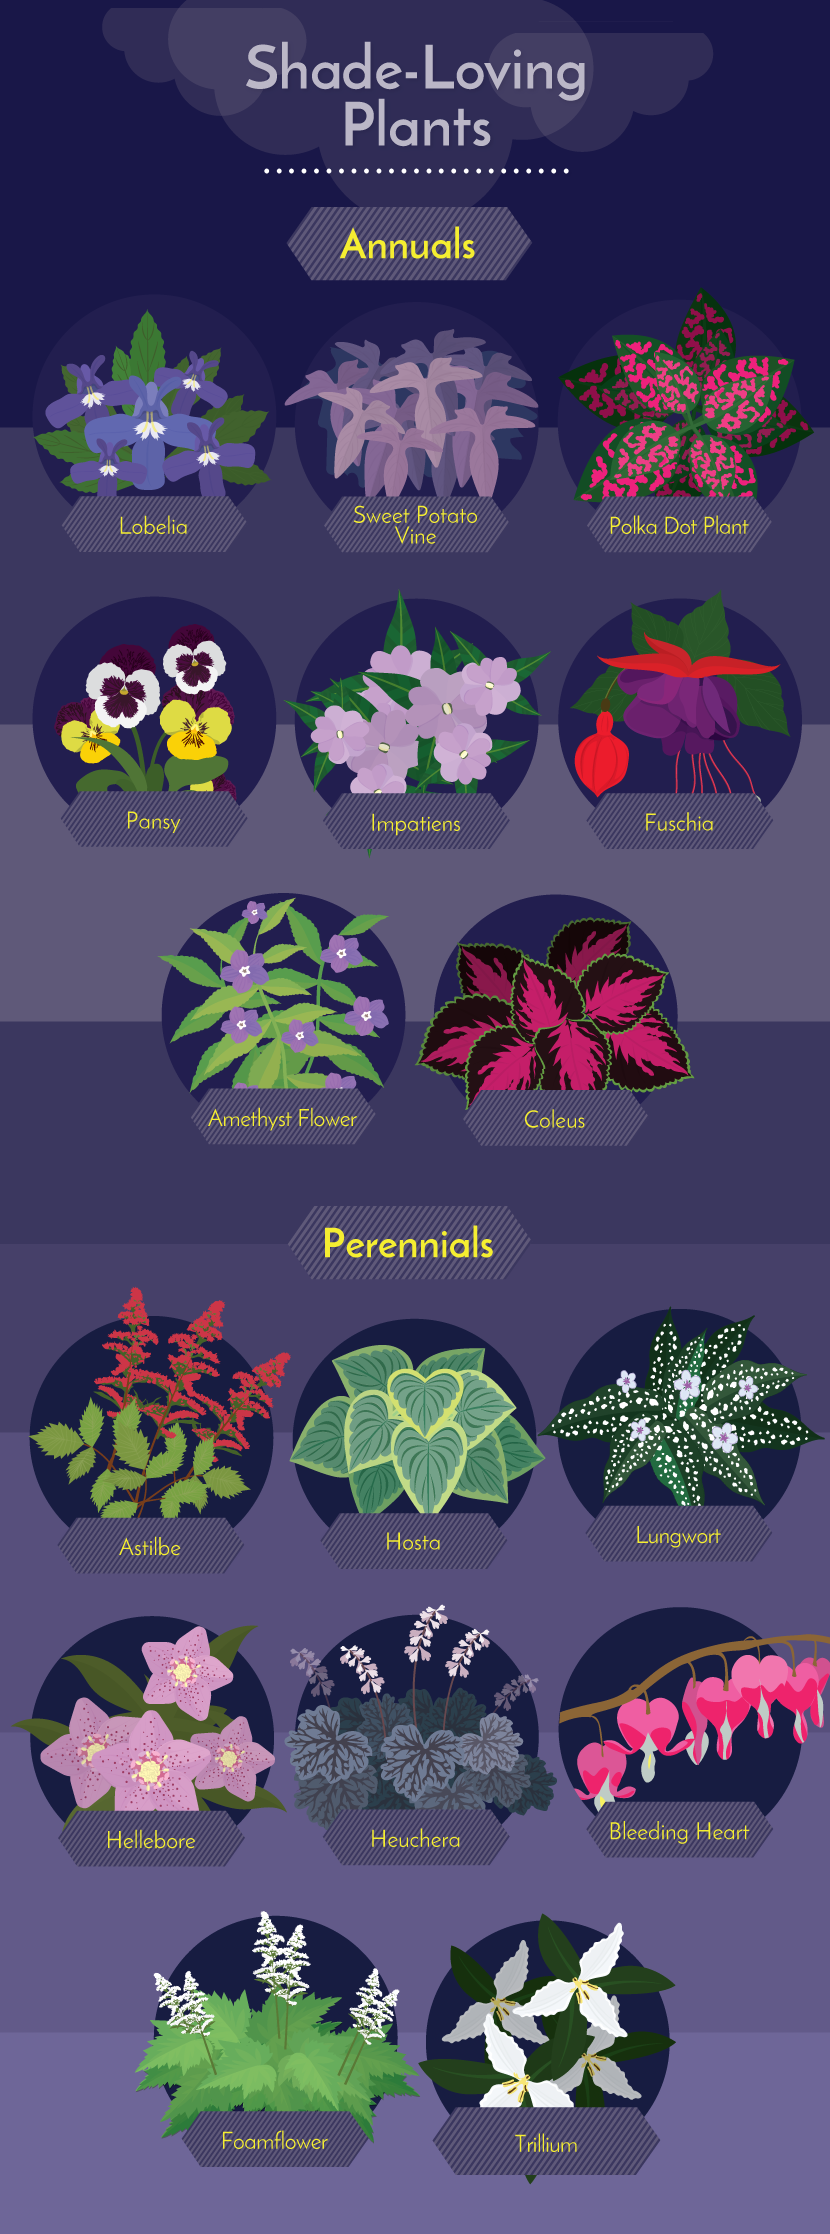 Shade-Loving Plants - Working With Challenging Garden Styles